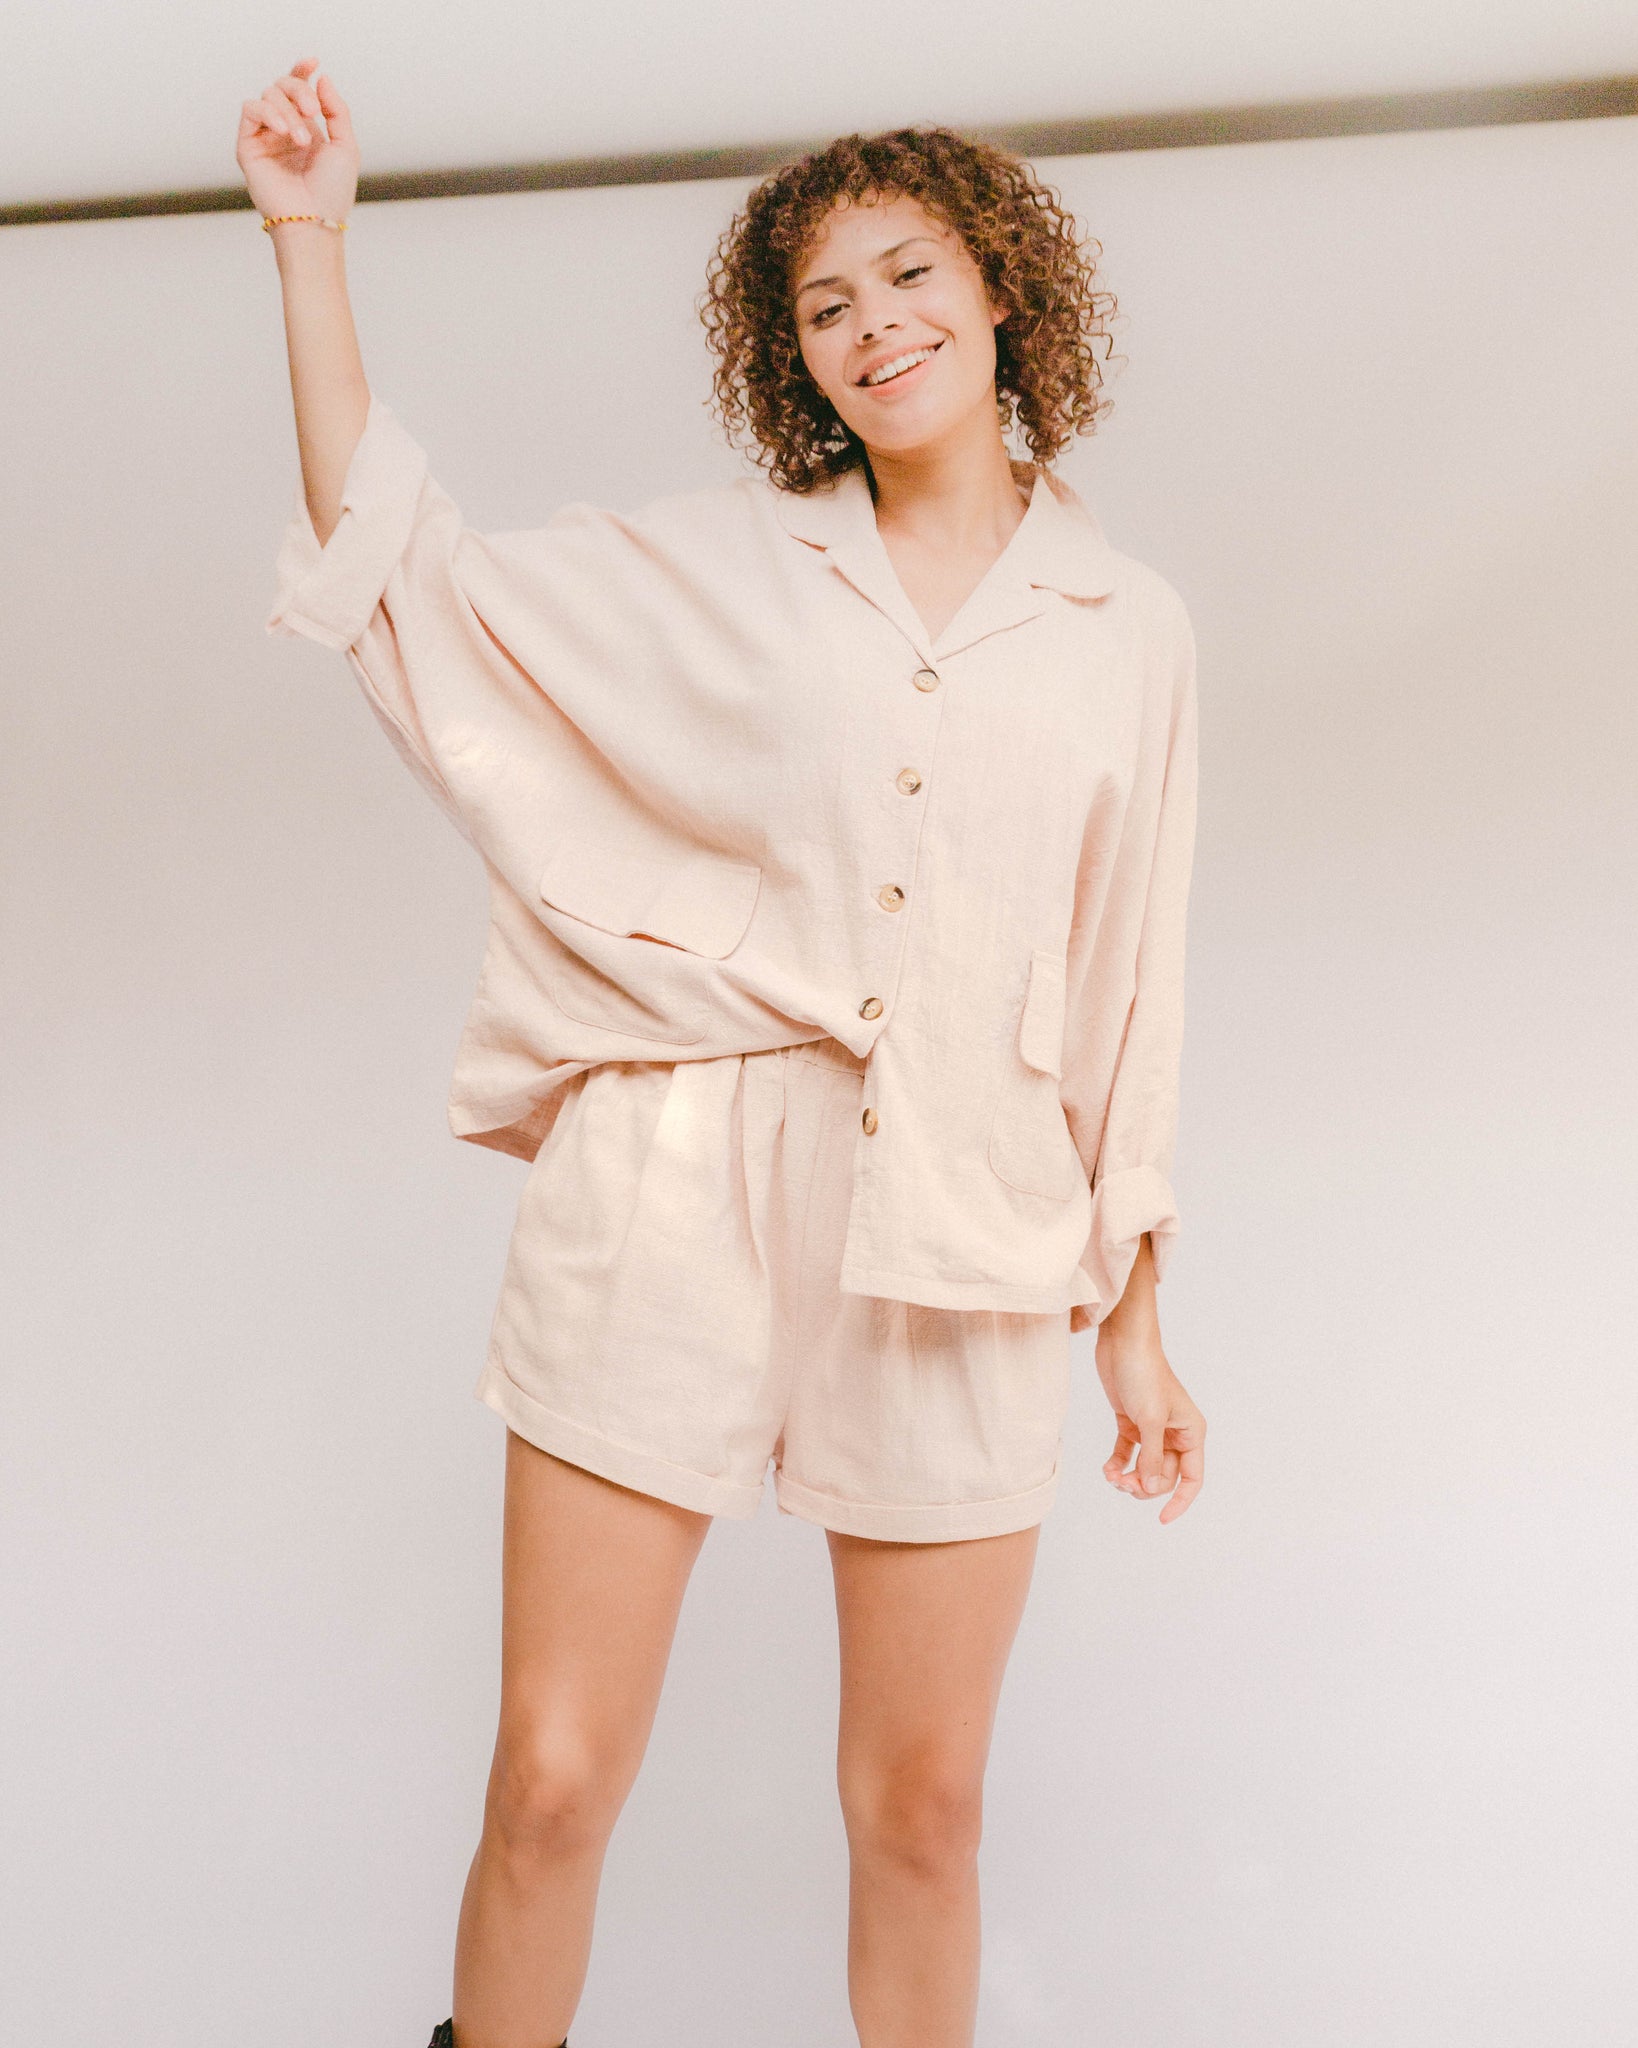 Oversized loungewear made from soft yet durable fabrics. They feel softer with every wash. Our fabric is hypoallergenic, moisture wicking and adjusts to your body temperature to stay cool in the summer and warm in the winter which makes it a great choice for any time of the year.